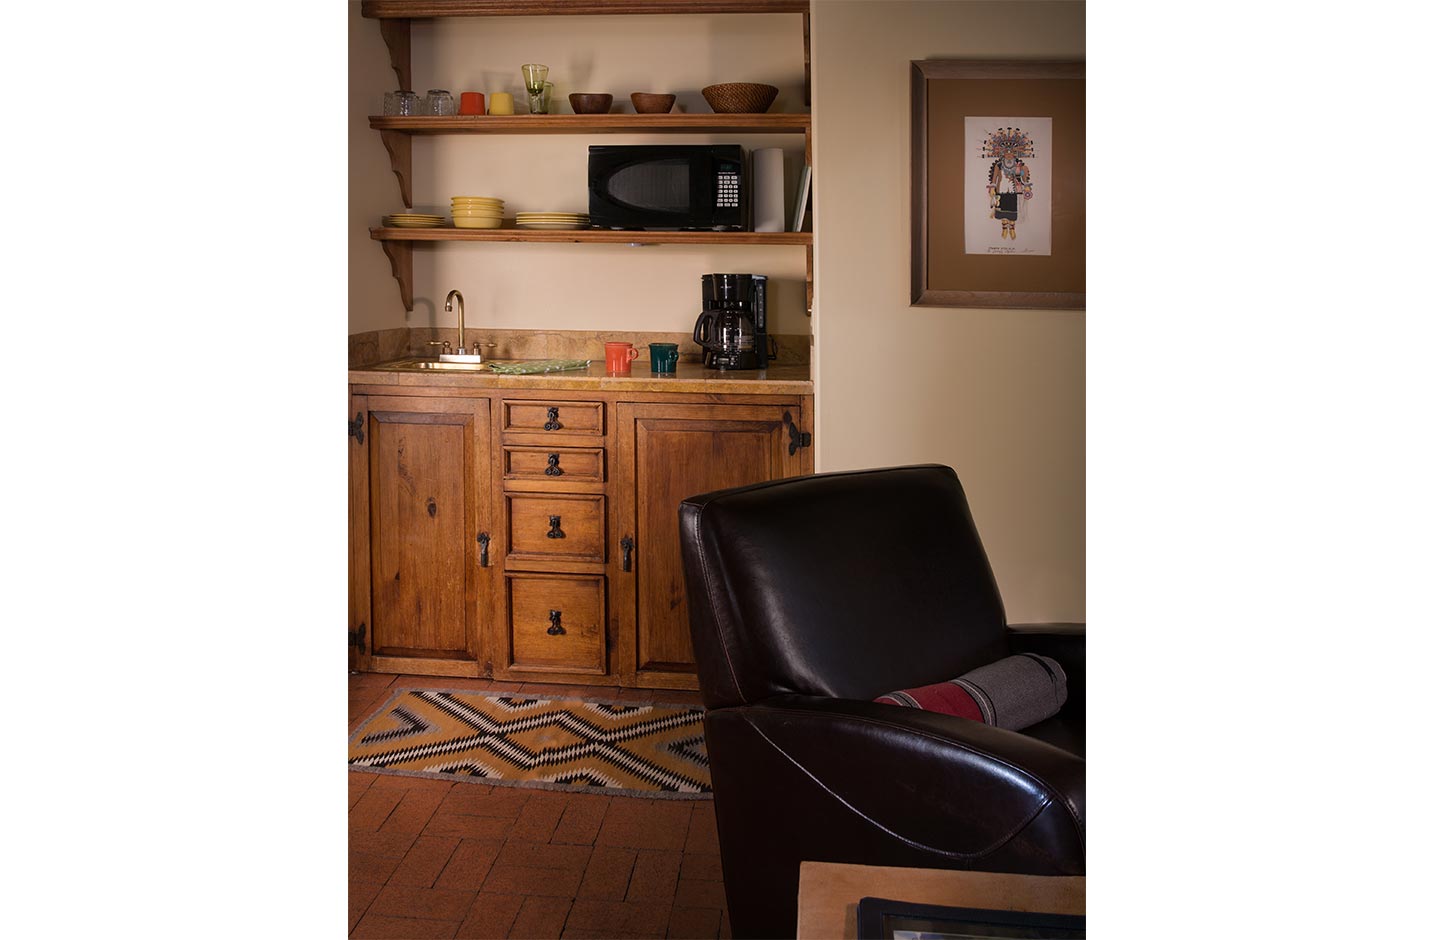 A chair at a writing desk and a wetbar with microwave and coffee maker